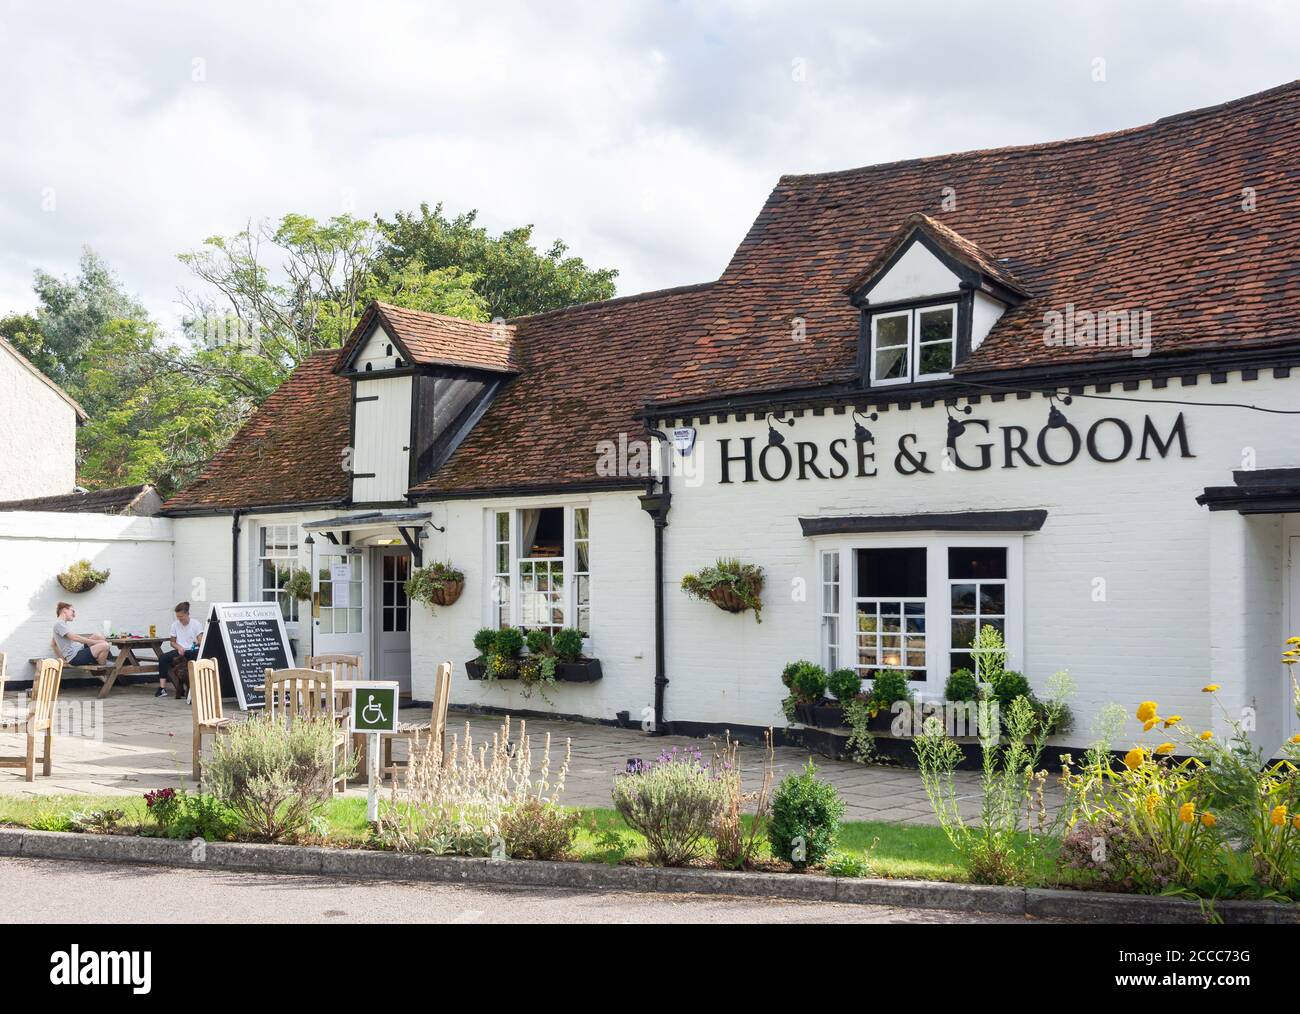 18e siècle Horse & Groom Inn, Hare Hatch, Berkshire, Angleterre, Royaume-Uni Banque D'Images